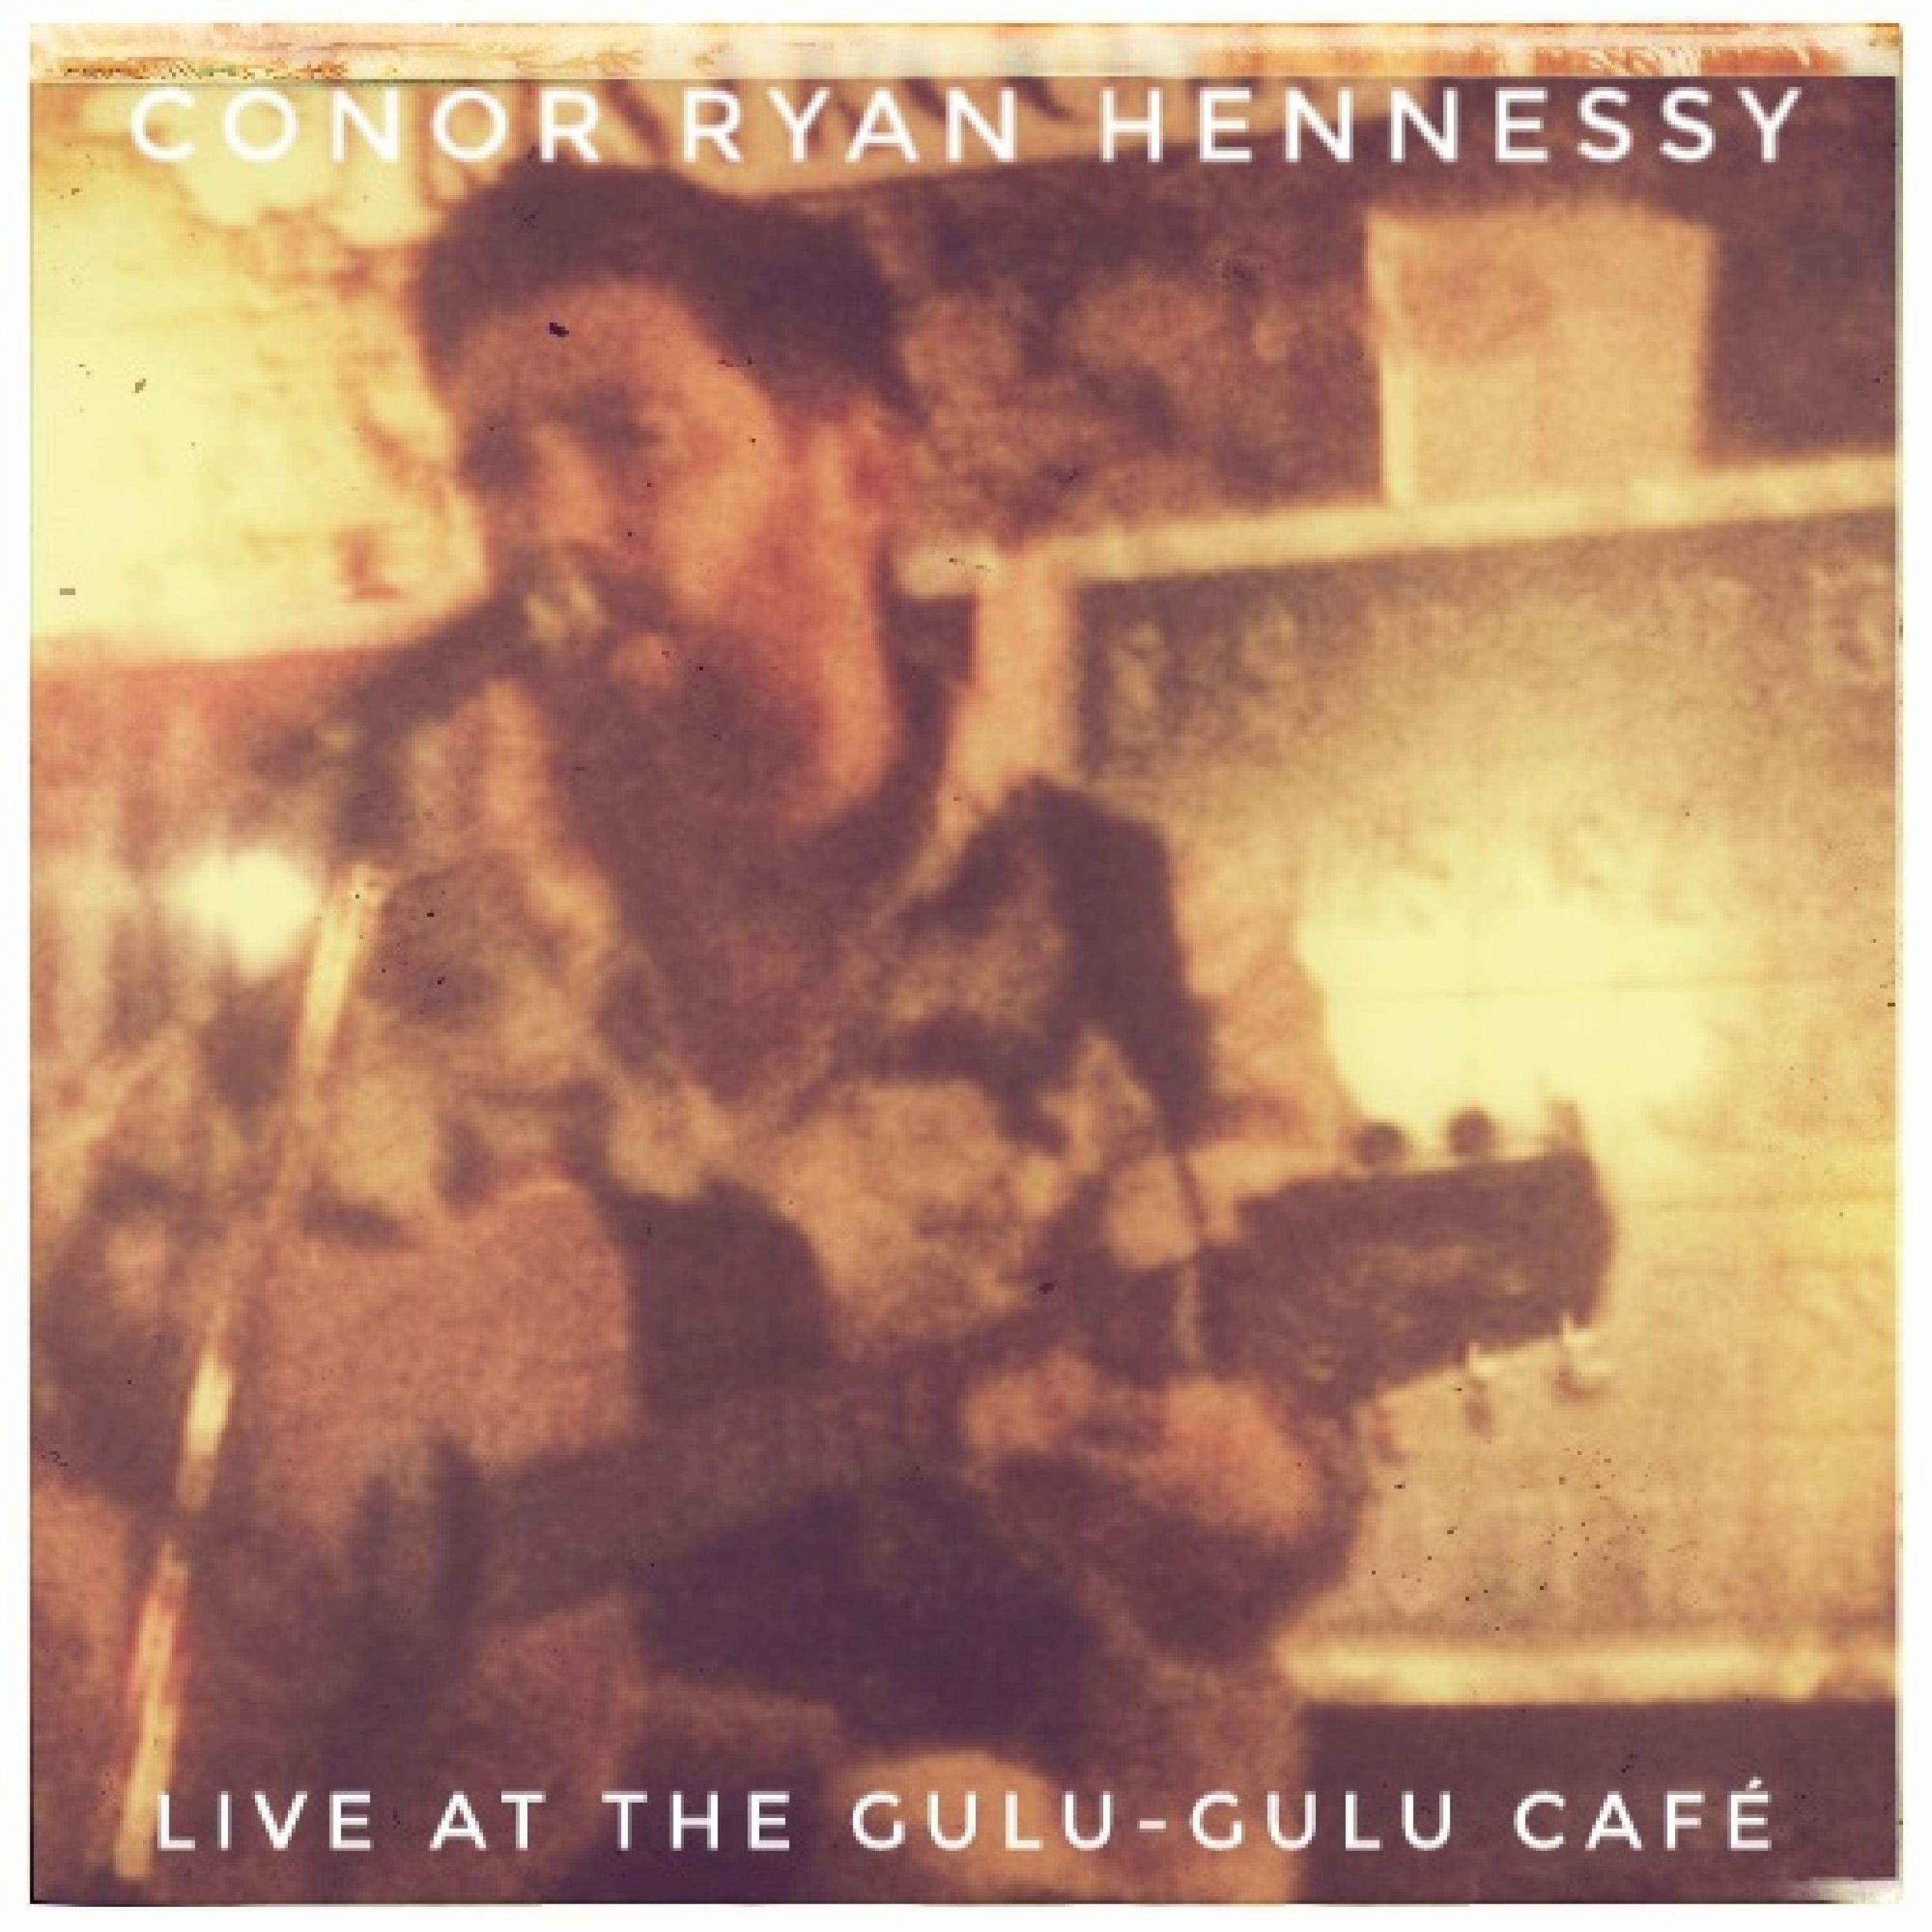 Conor Ryan Hennessy - They Call me Barbaroja (Live)